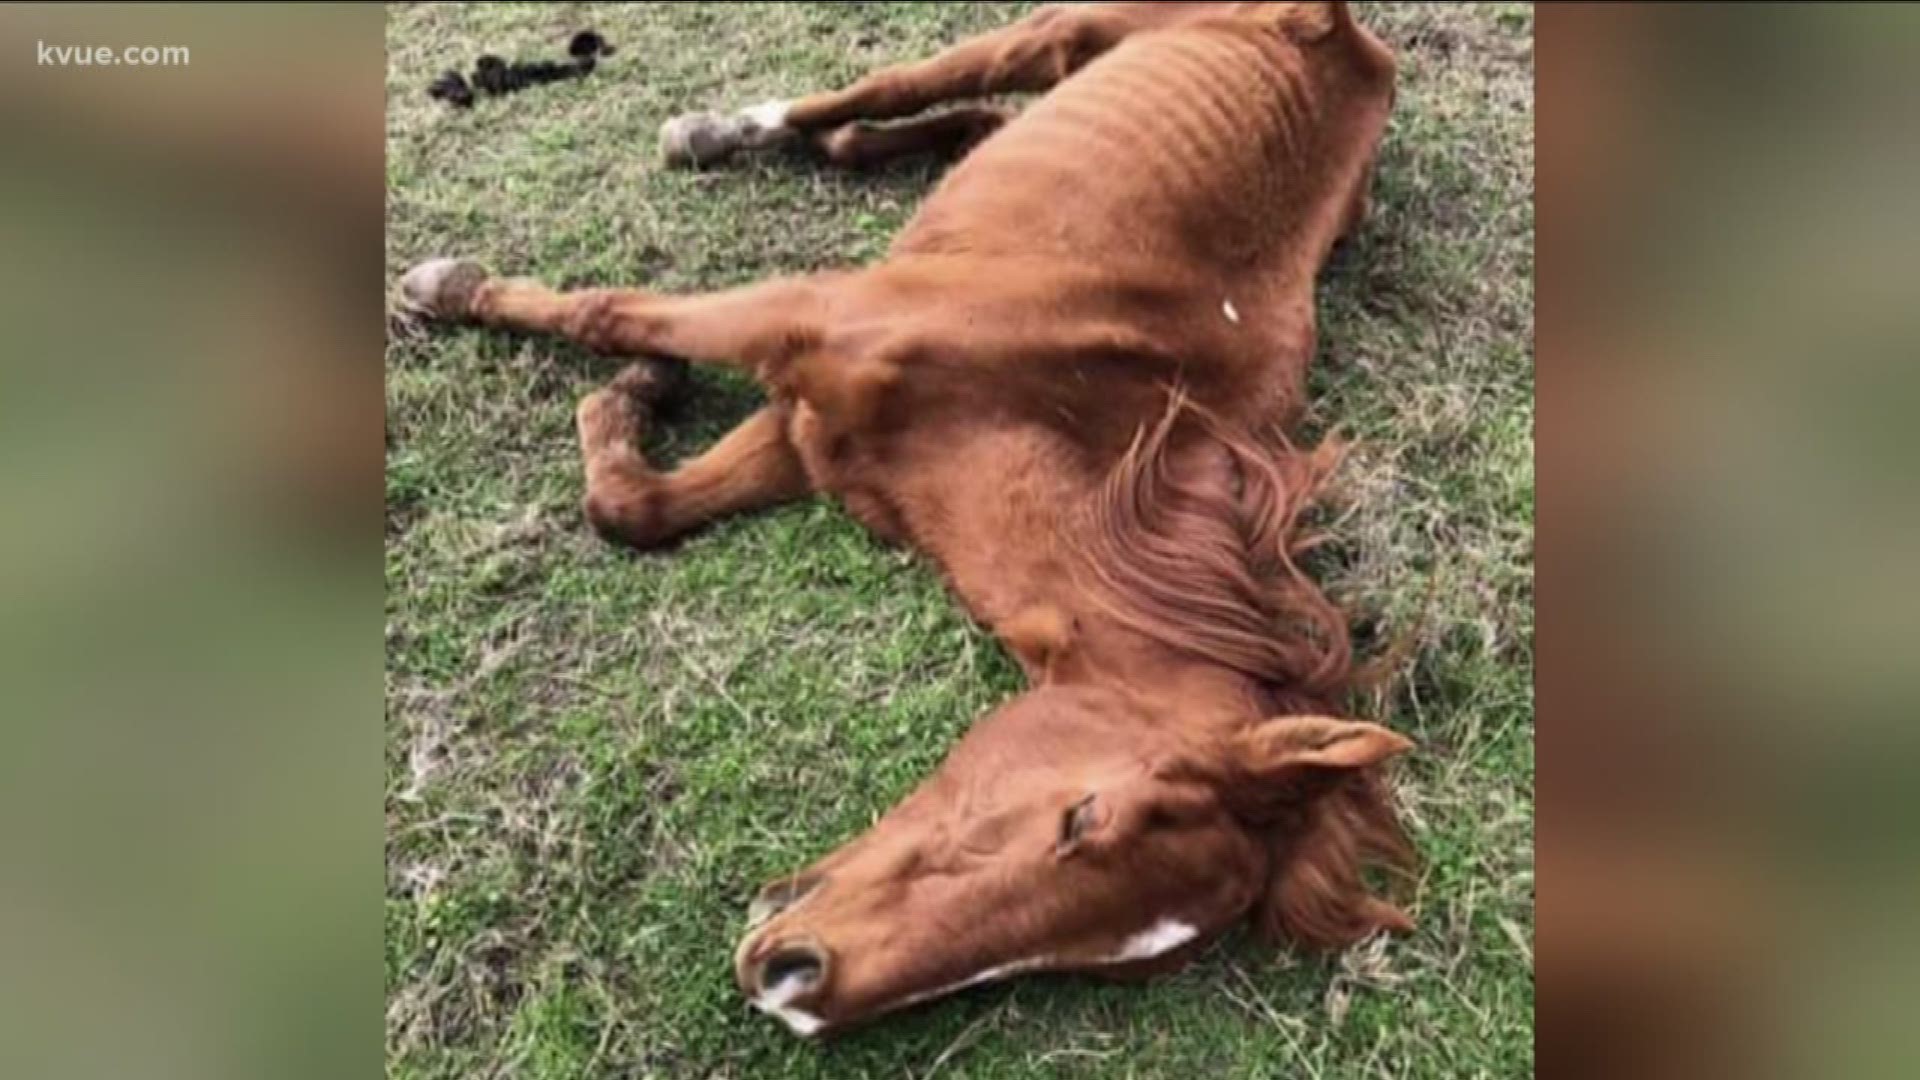 An Austin woman tipped off the Travis County Sheriff's Office after finding a malnourished horse and dead cattle off East Highway 71.